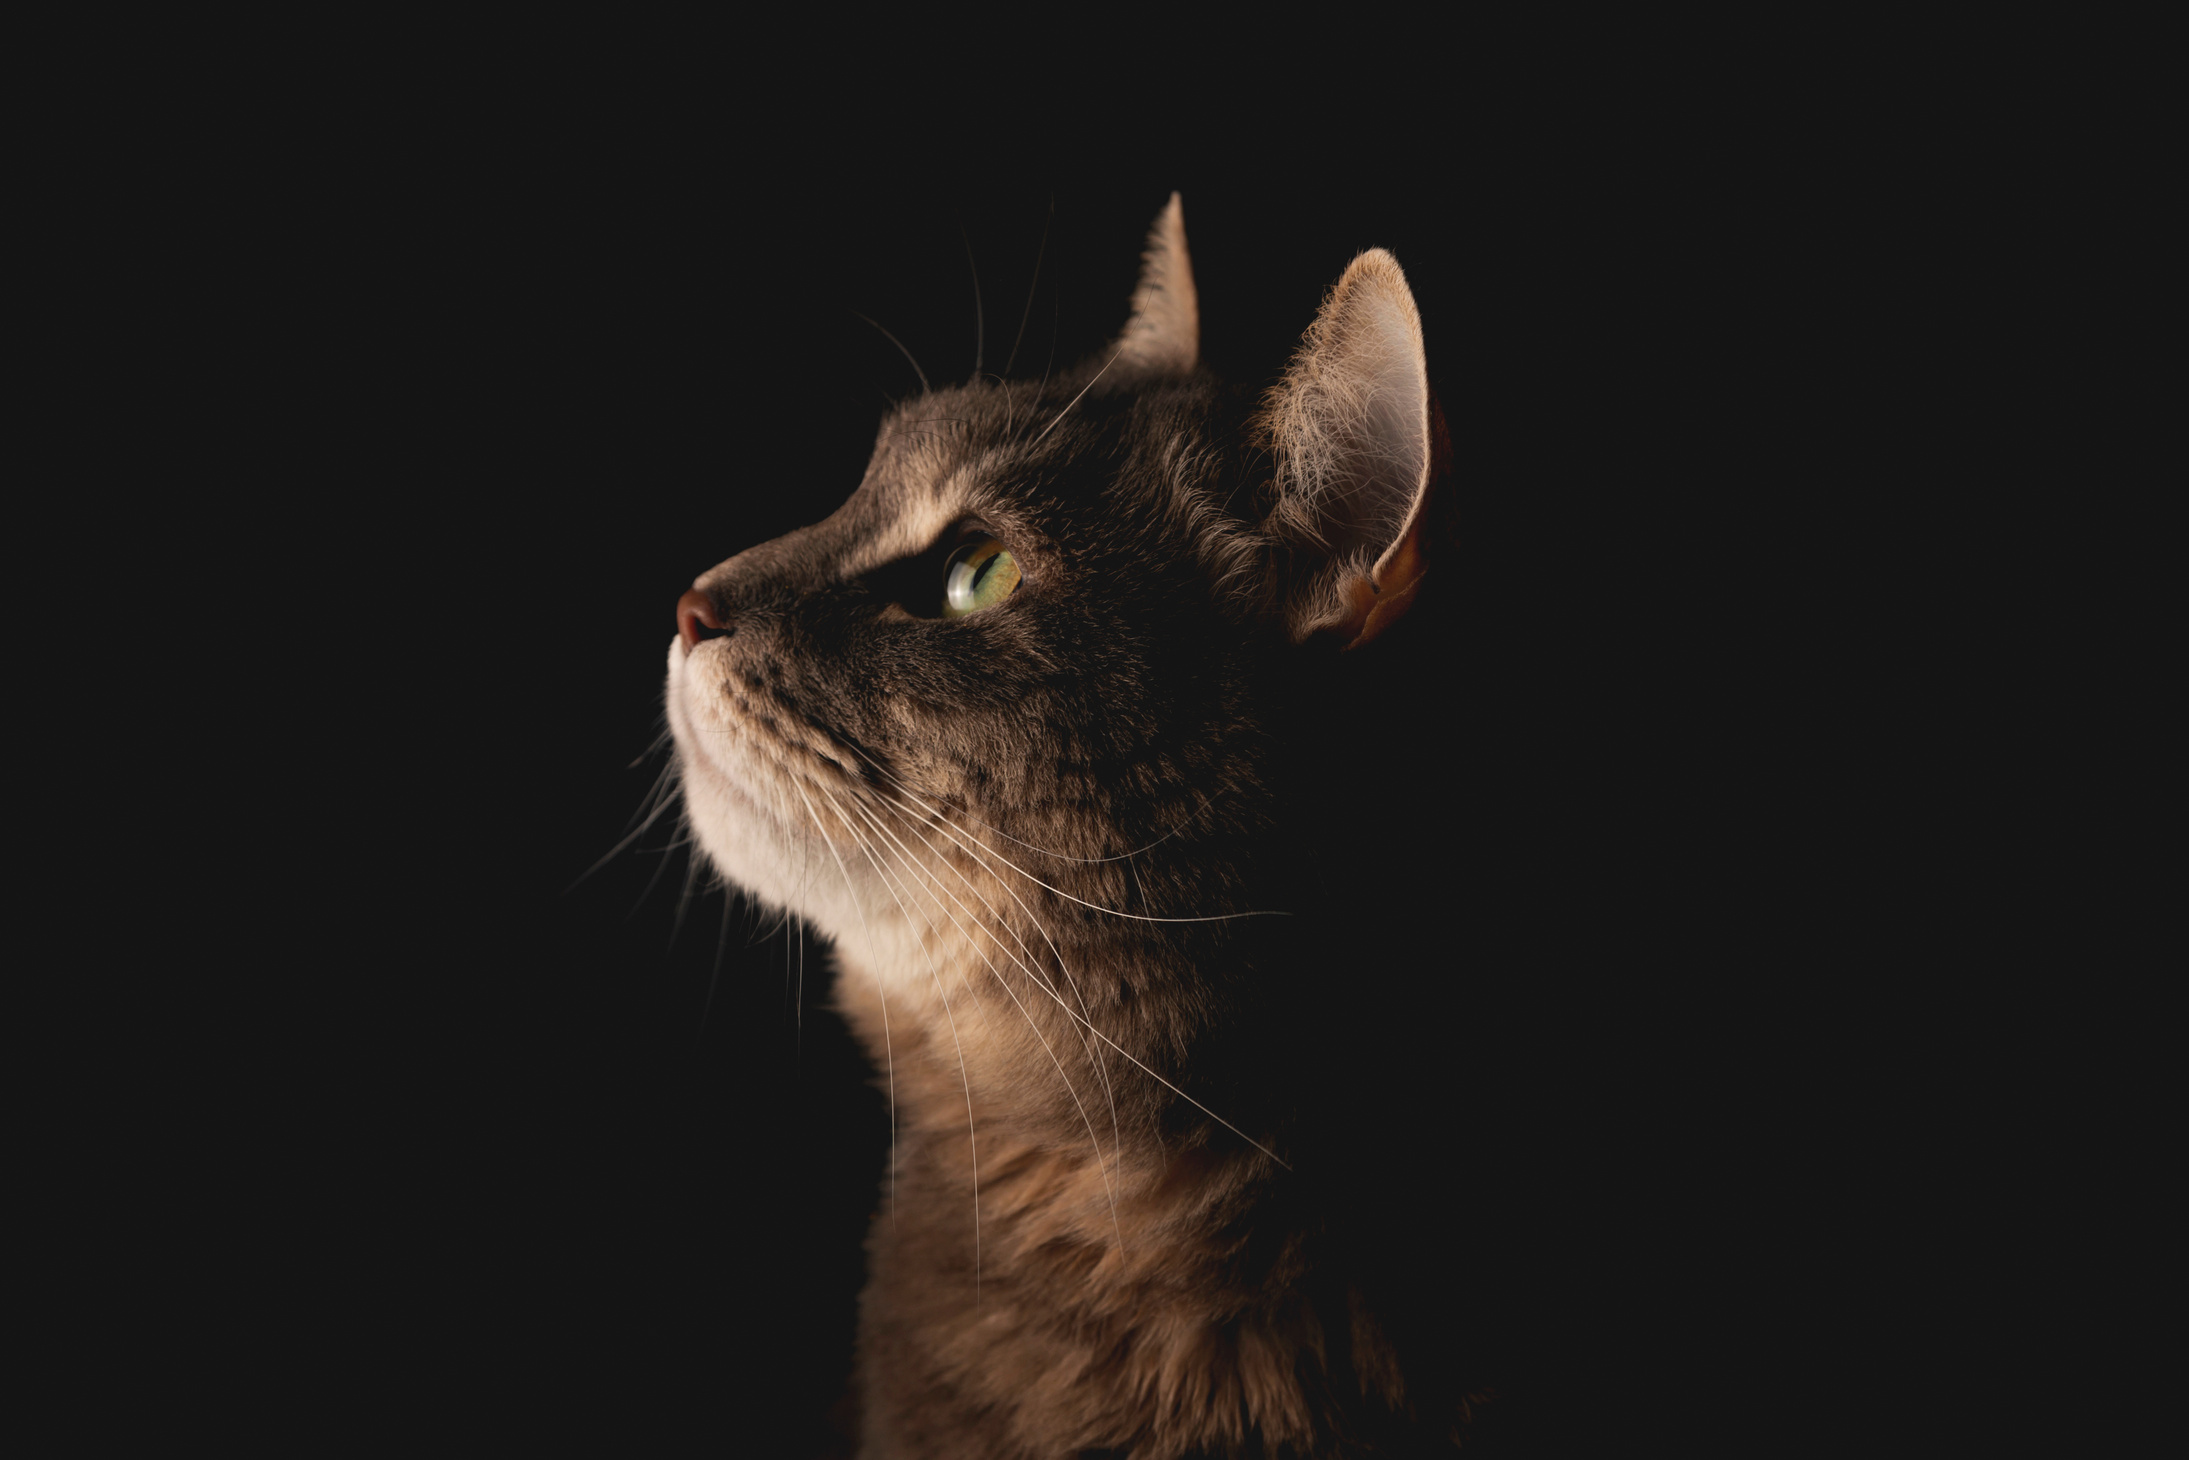 Portrait of a Cat on Black Background